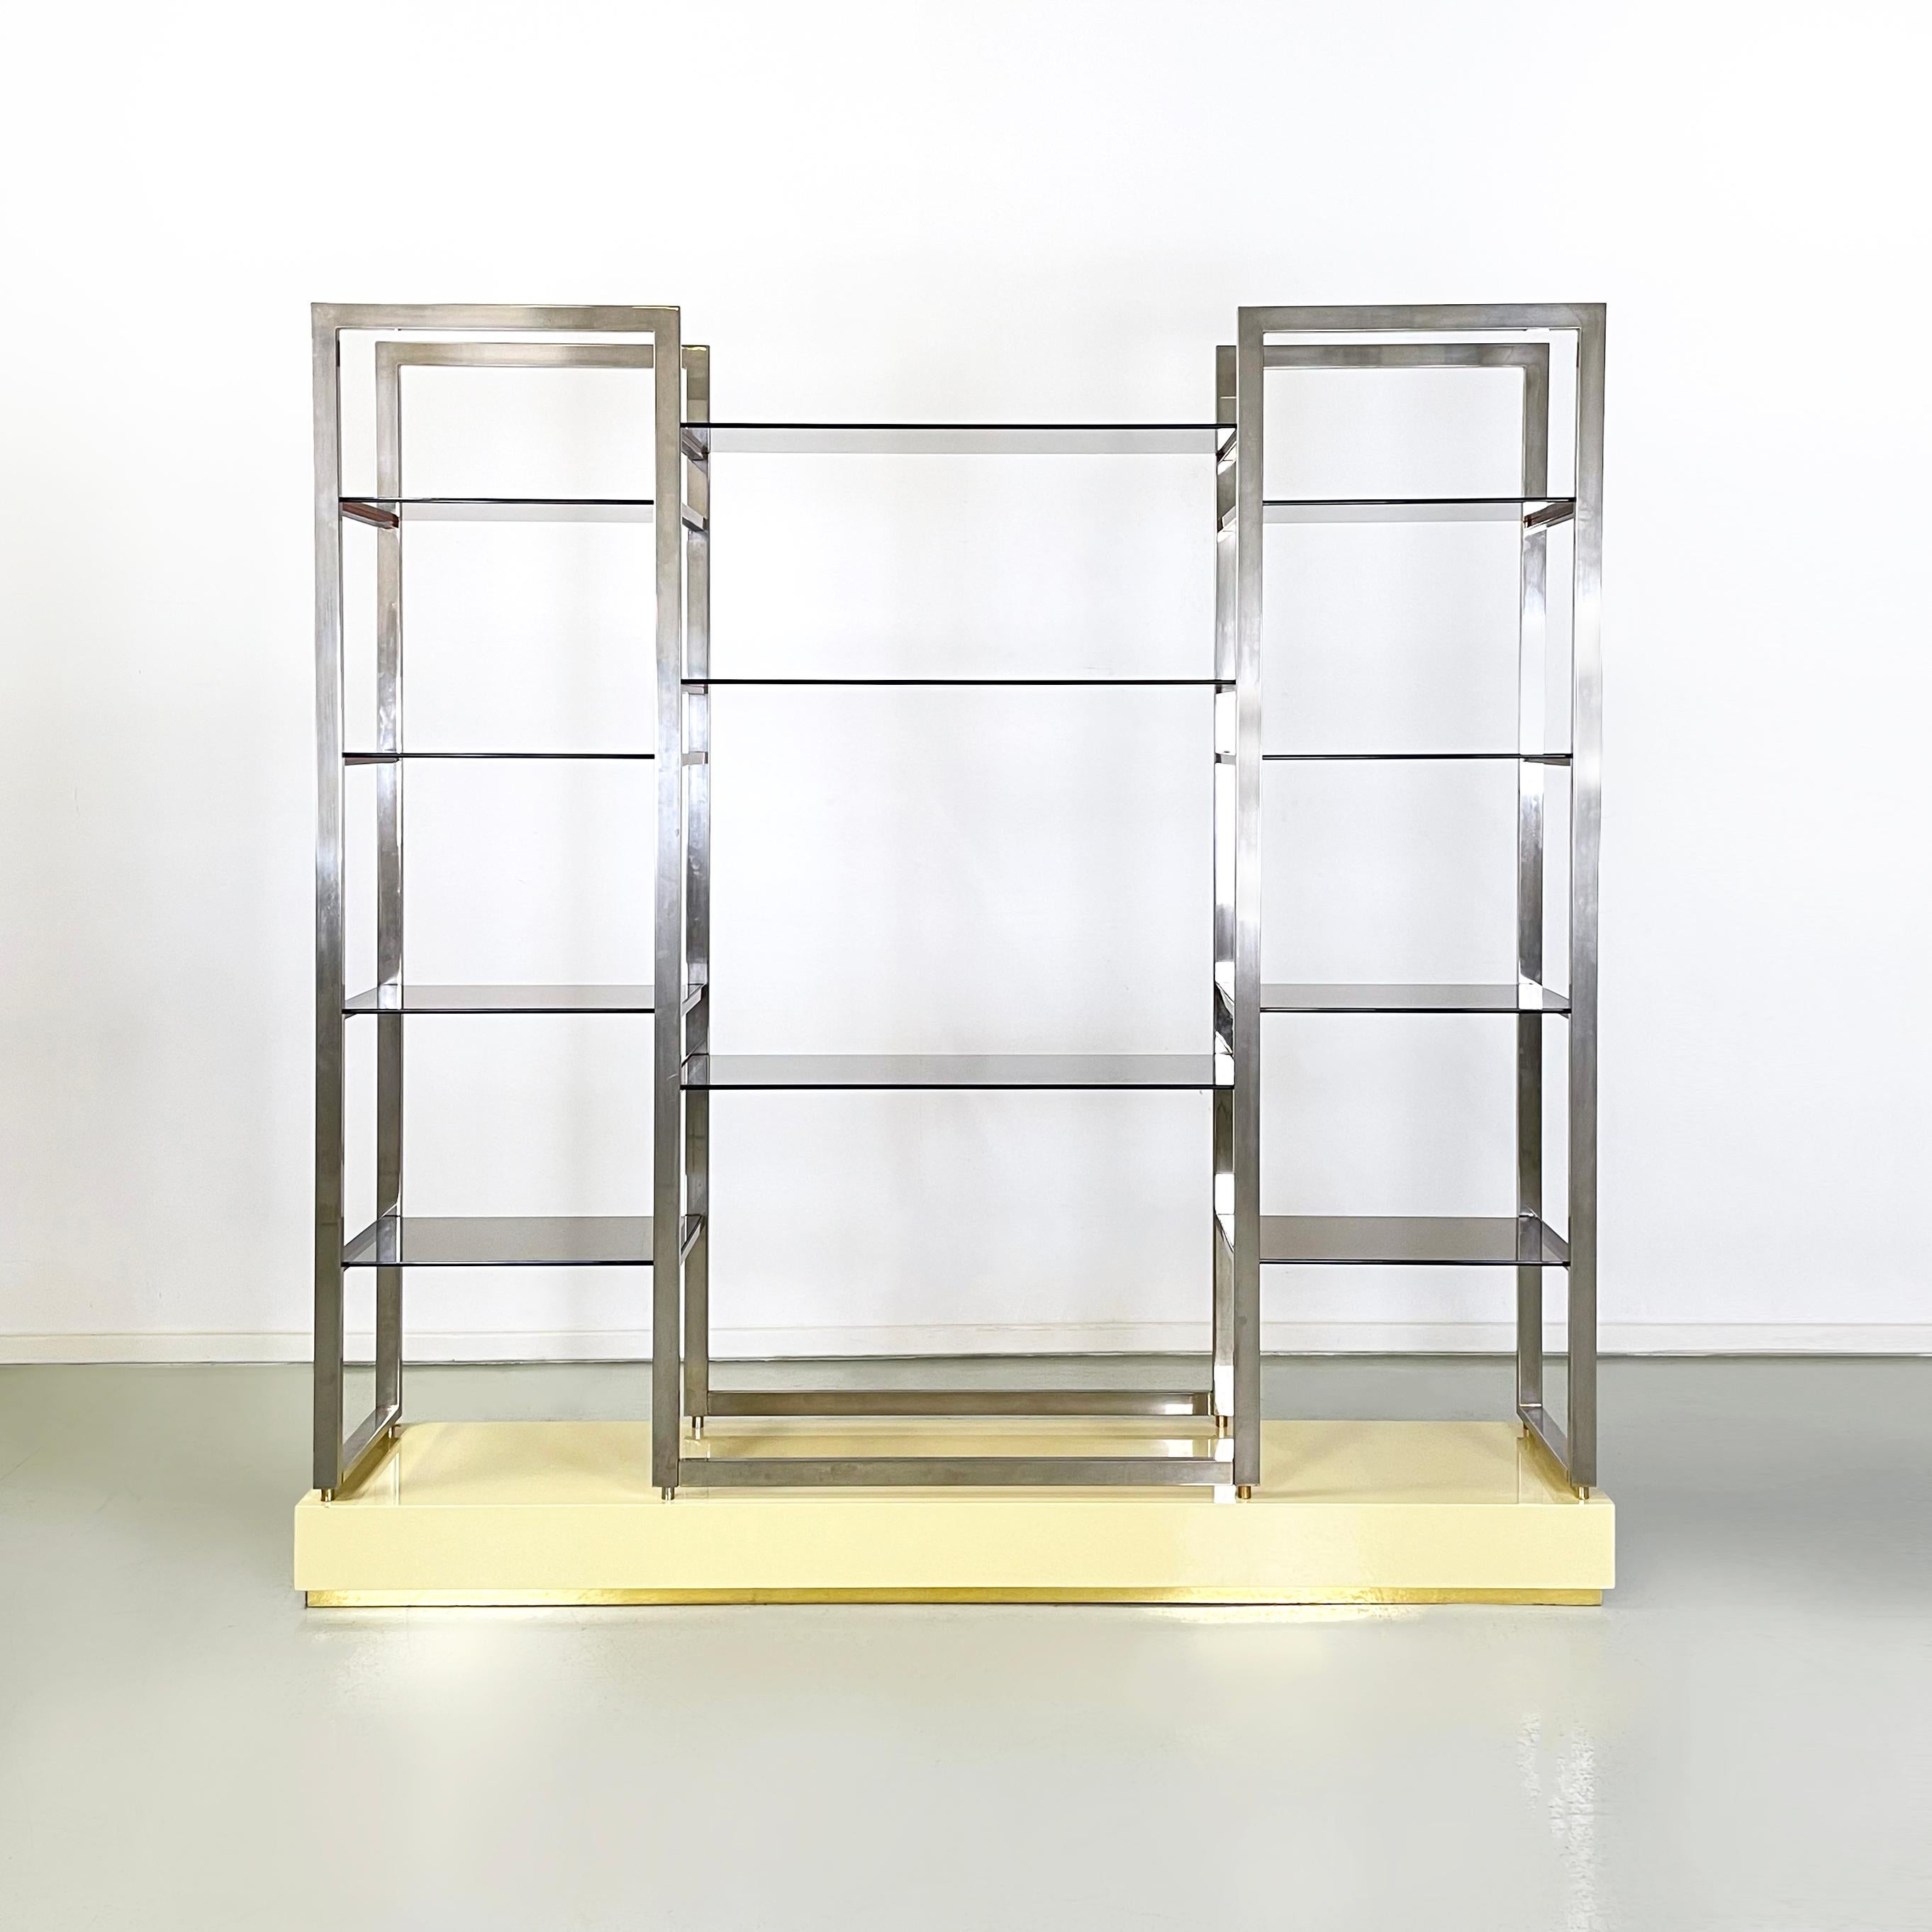 French modern smoked glass, metal and lacquered wood Bookcase by Alain Delon, 1980s
Self-supporting floor bookcase with a rectangular base in cream yellow lacquered wood and brass details. The bookcase features several smoked glass shelves, anchored